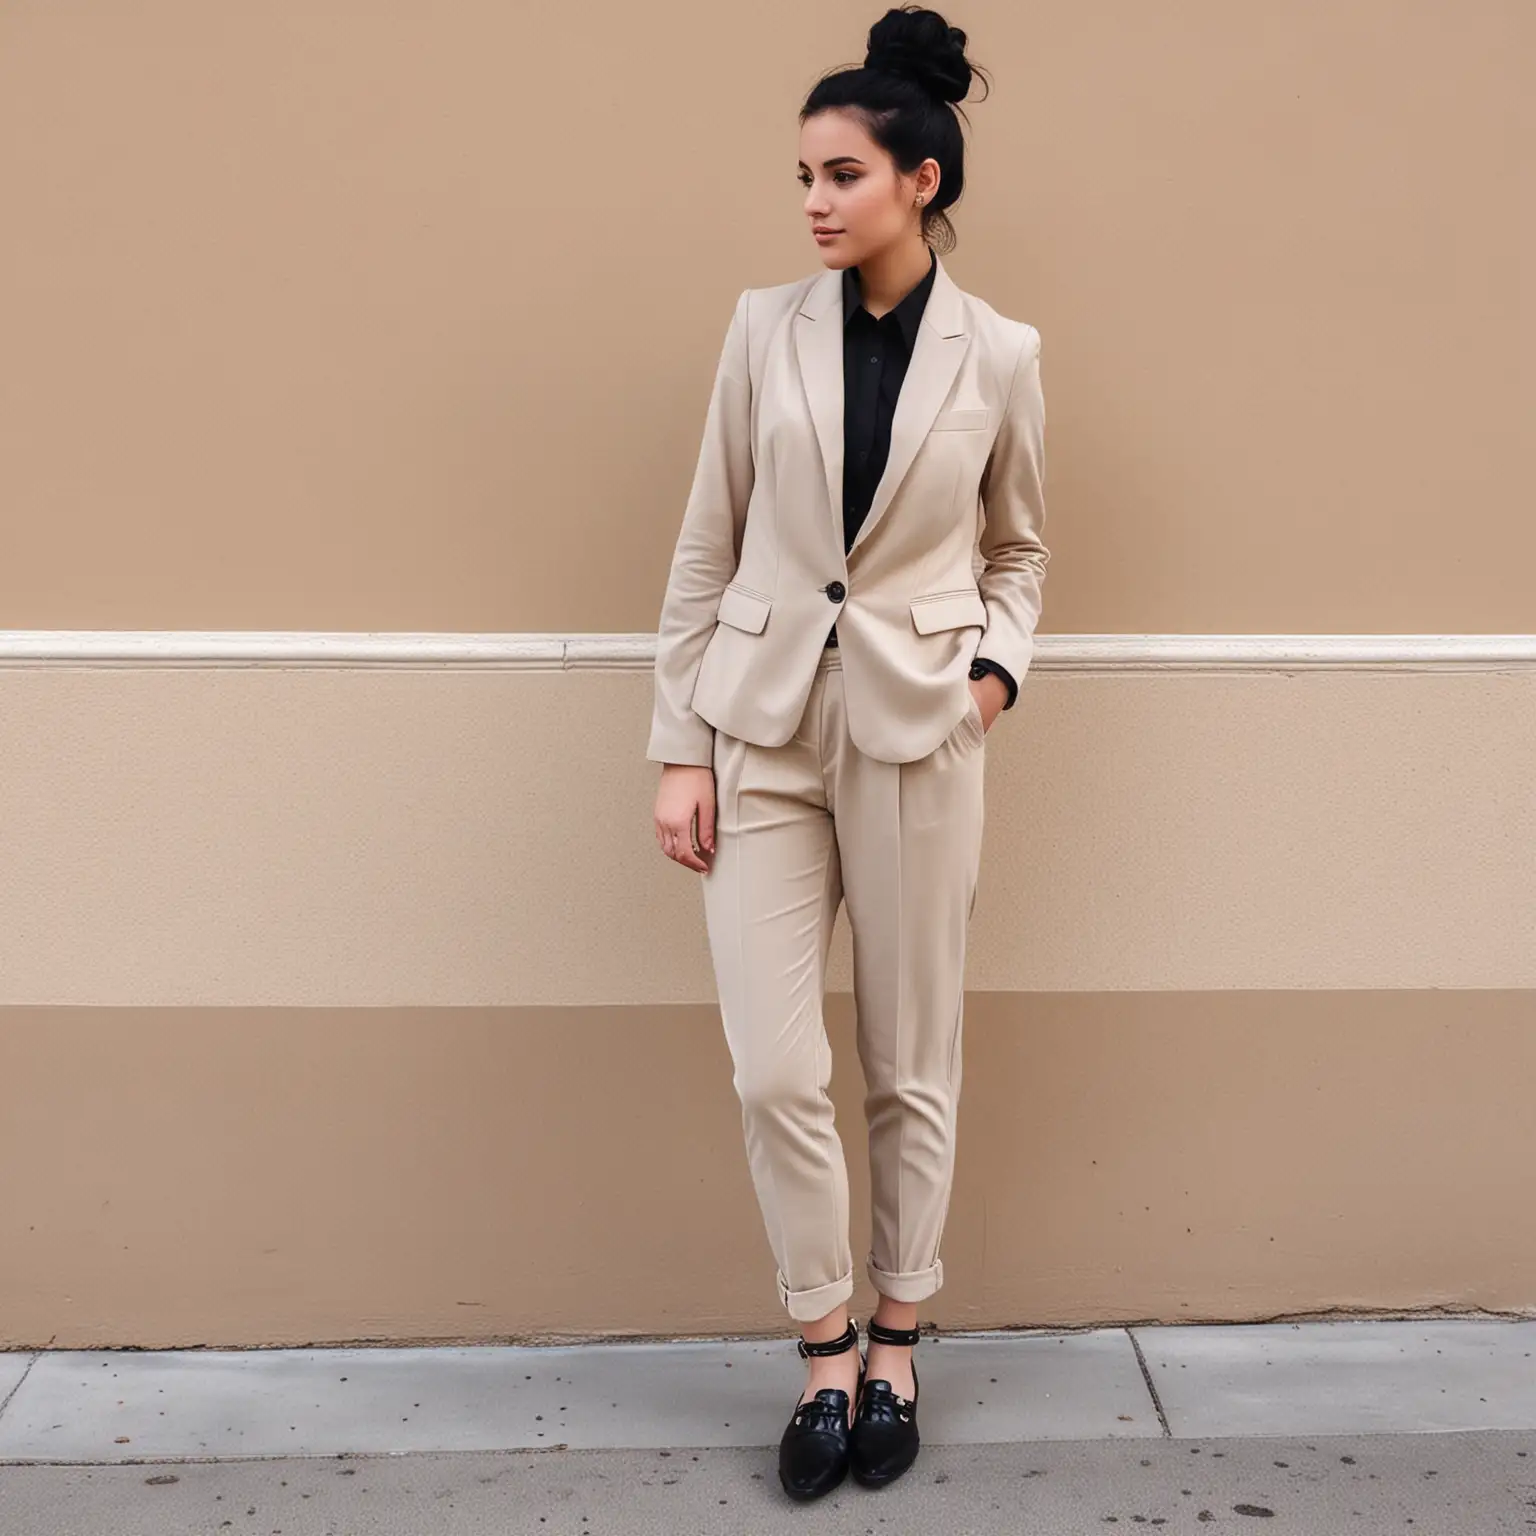 goth emo teenage girl with black hair in a bun wearing a neutral color tailored outfit and blazer, fancy pants and professional blouse for a job interview. should look like a teen girl full body outfit with closed toe flats for shoes.